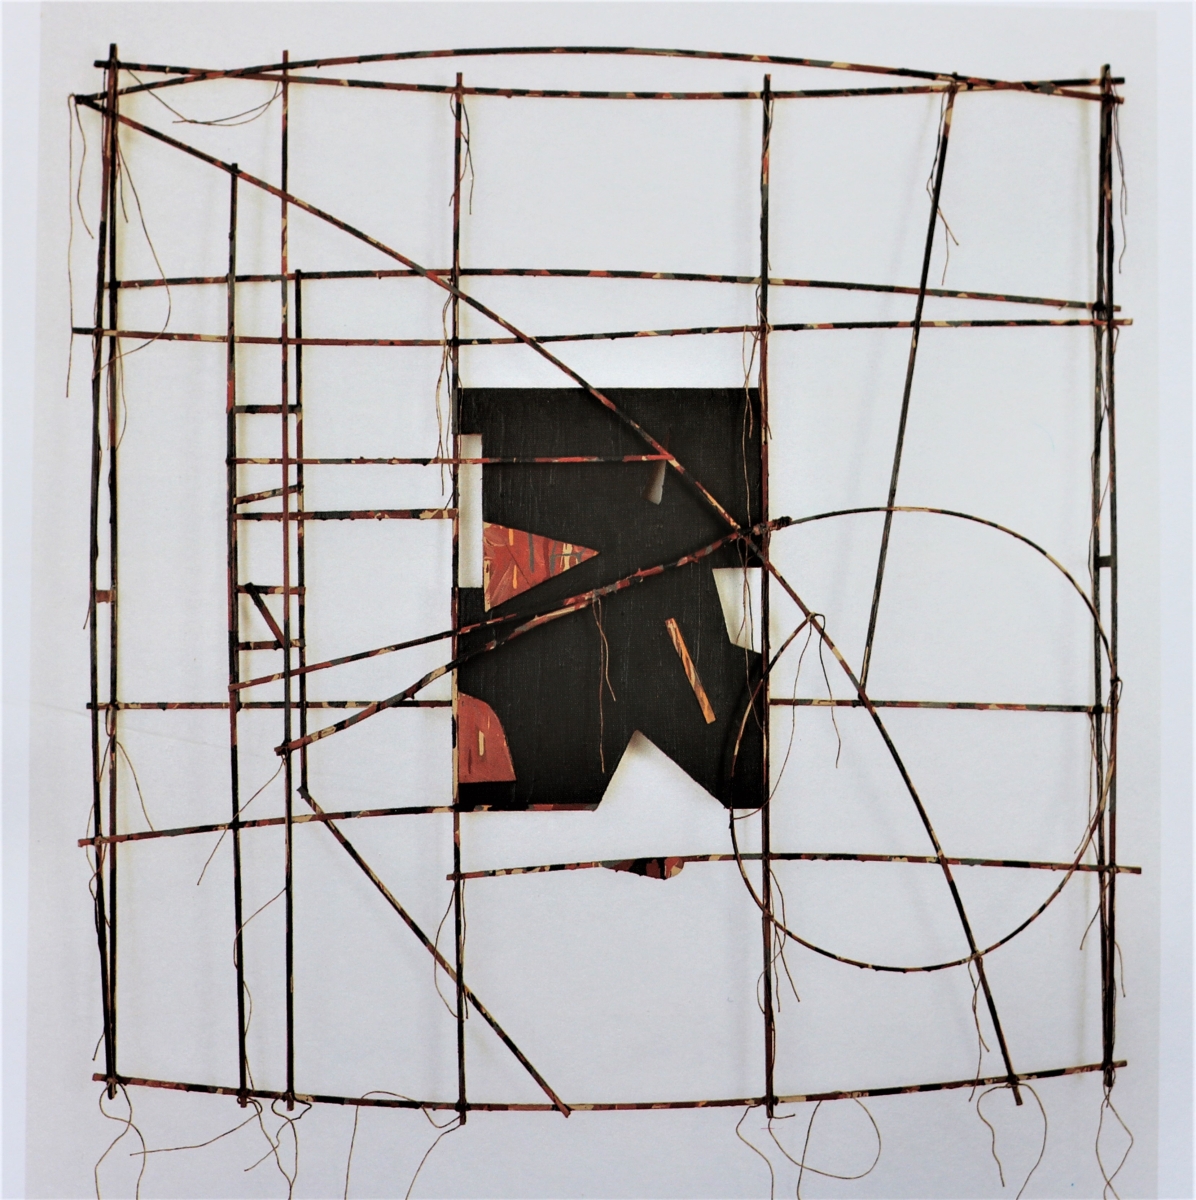 Thargelia, 1987, Painted wood, 100x100cm